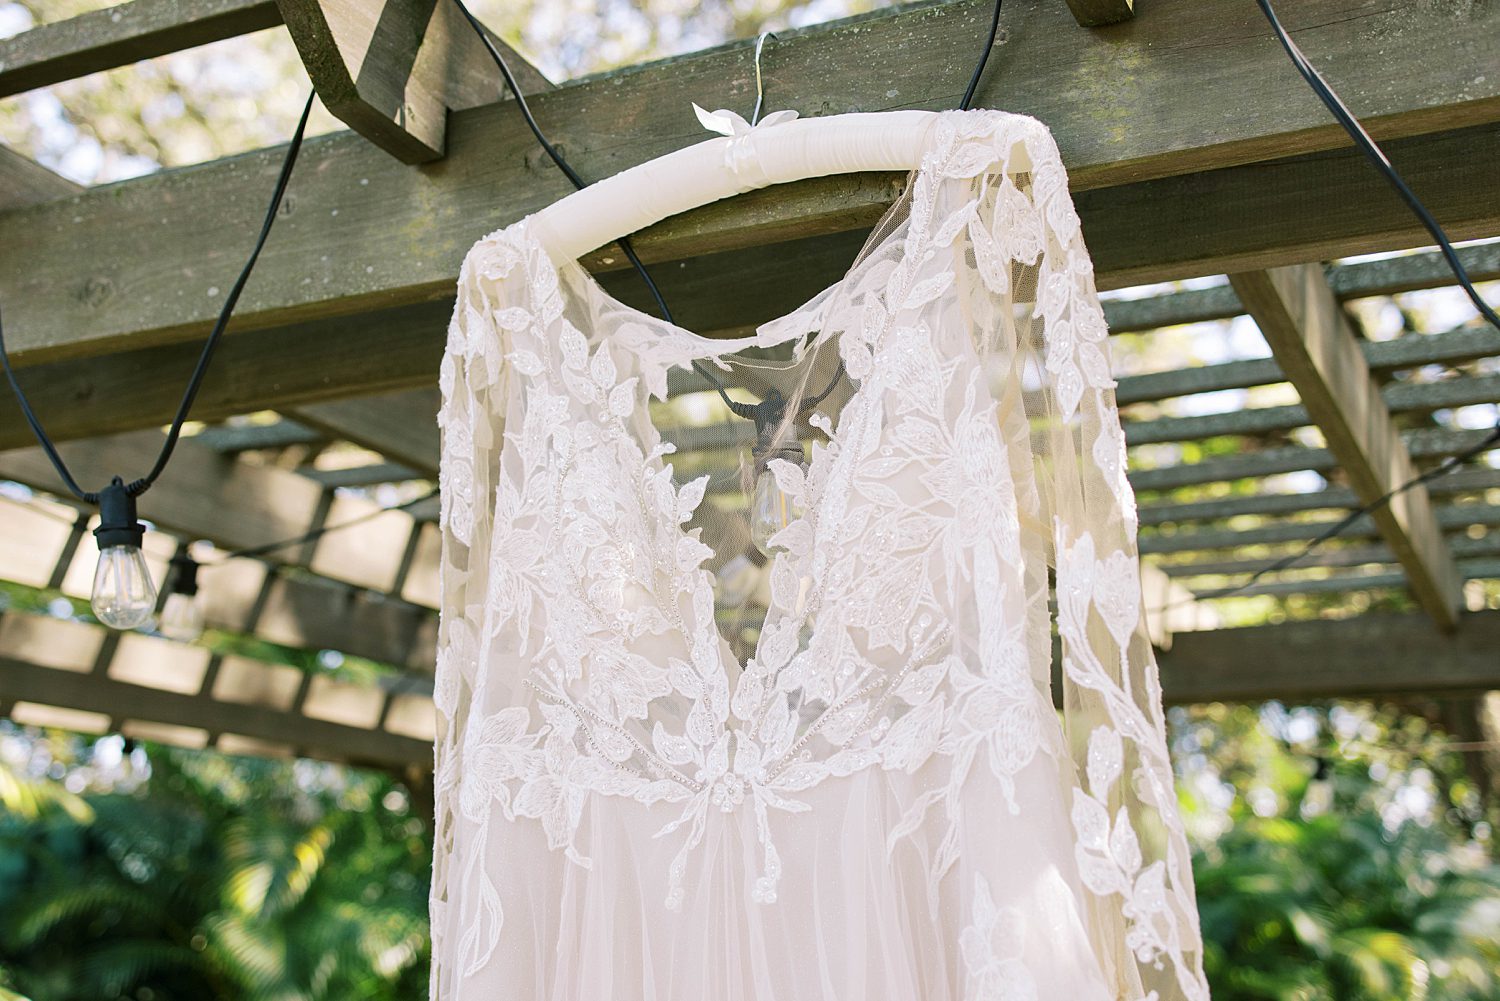 lace wedding dress hangs on wooden arbor at Events Under the Oaks